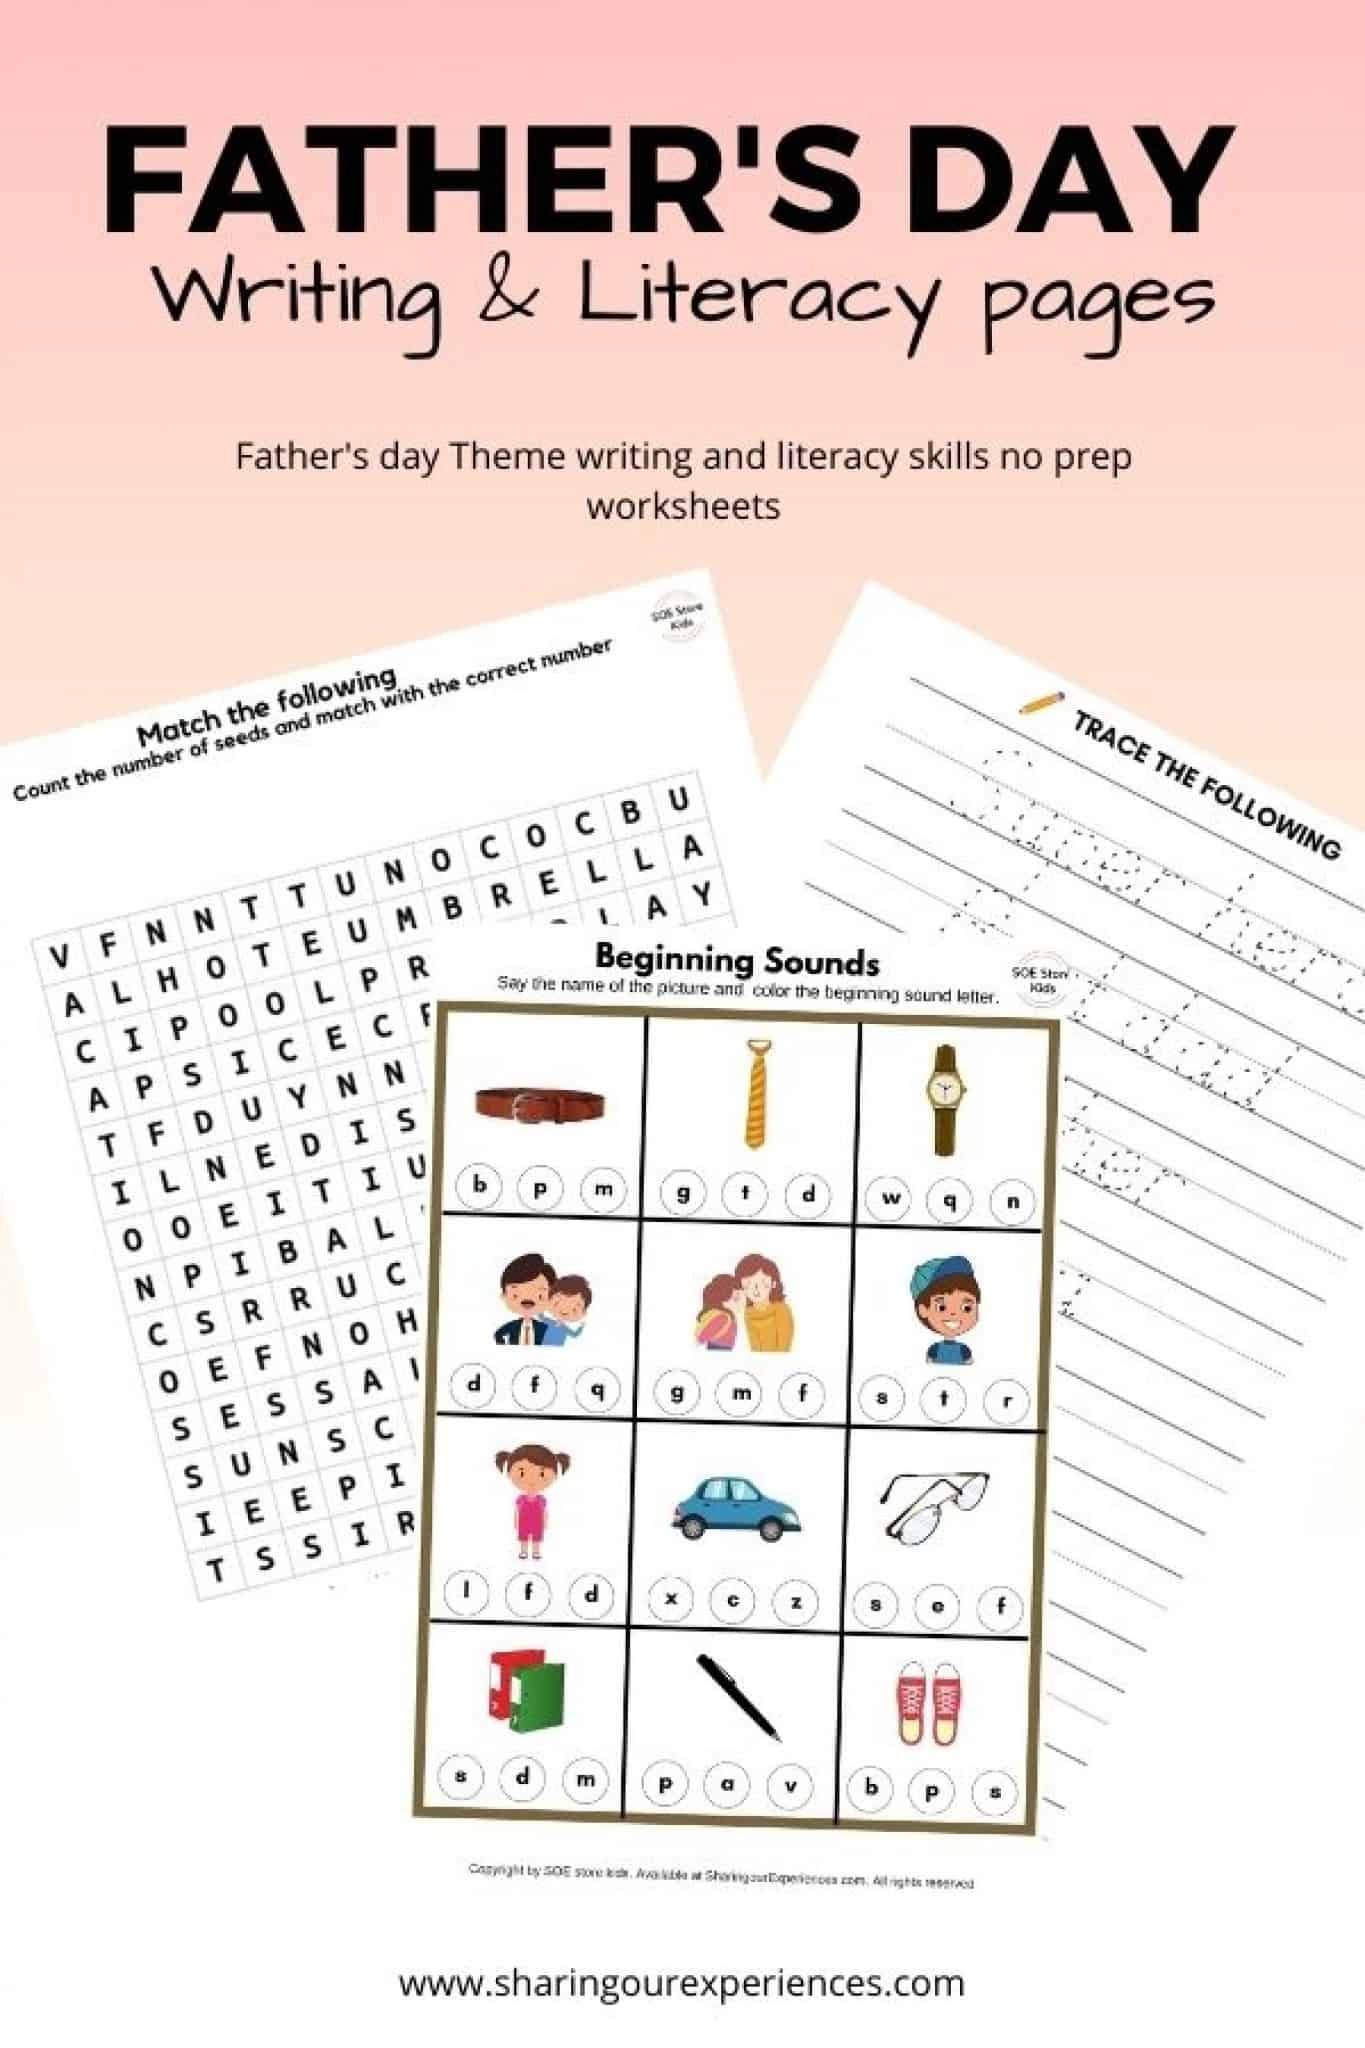 Father's Day Printable Worksheets for kids | Sharing Our Experiences